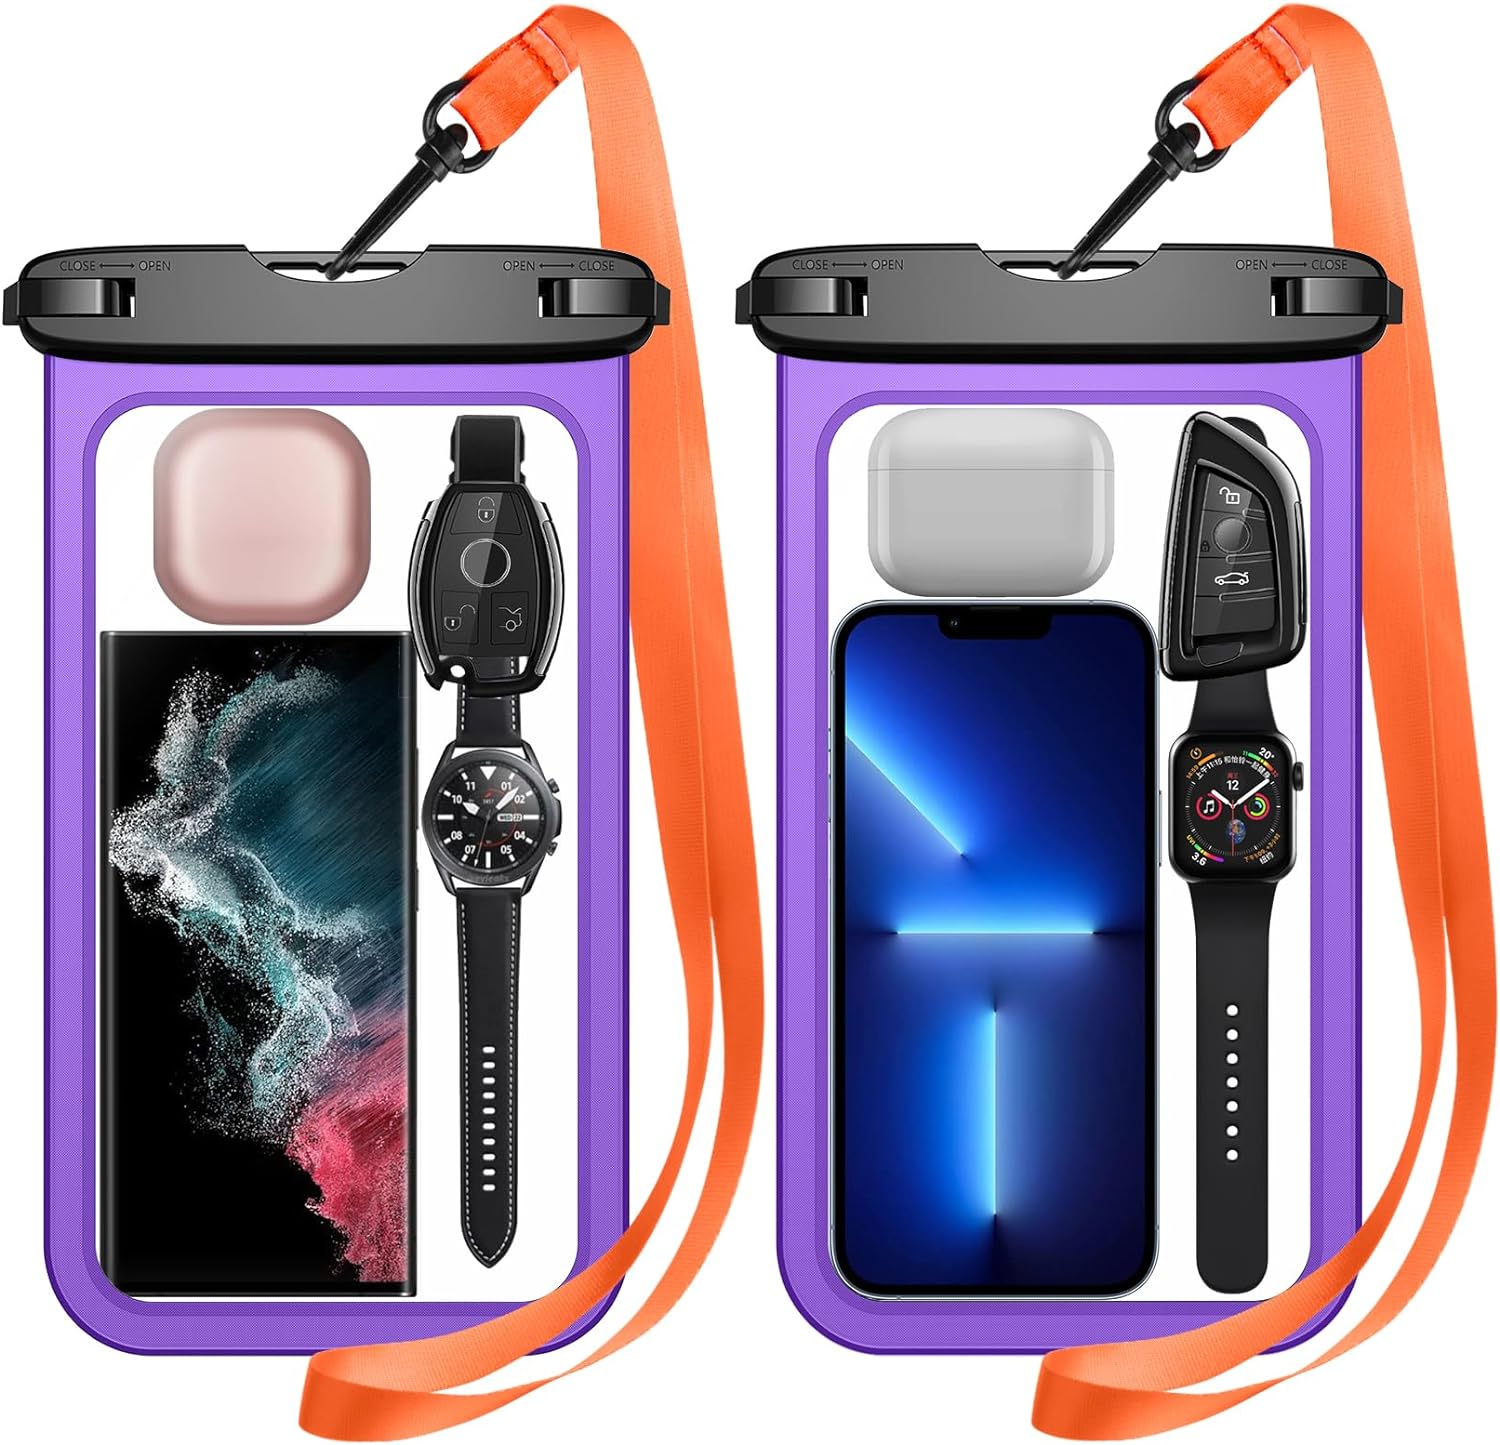 Temdan 2Pack Waterproof Phone Pouch,[Up to 10 Large]Universal IPX8 Waterproof Cell Phone Case Dry Bag with Lanyard for iPhone 15 Pro Max/14/13/12/11/SE,Galaxy S23 Ultra/S22/S21 for Vacation Purple*2